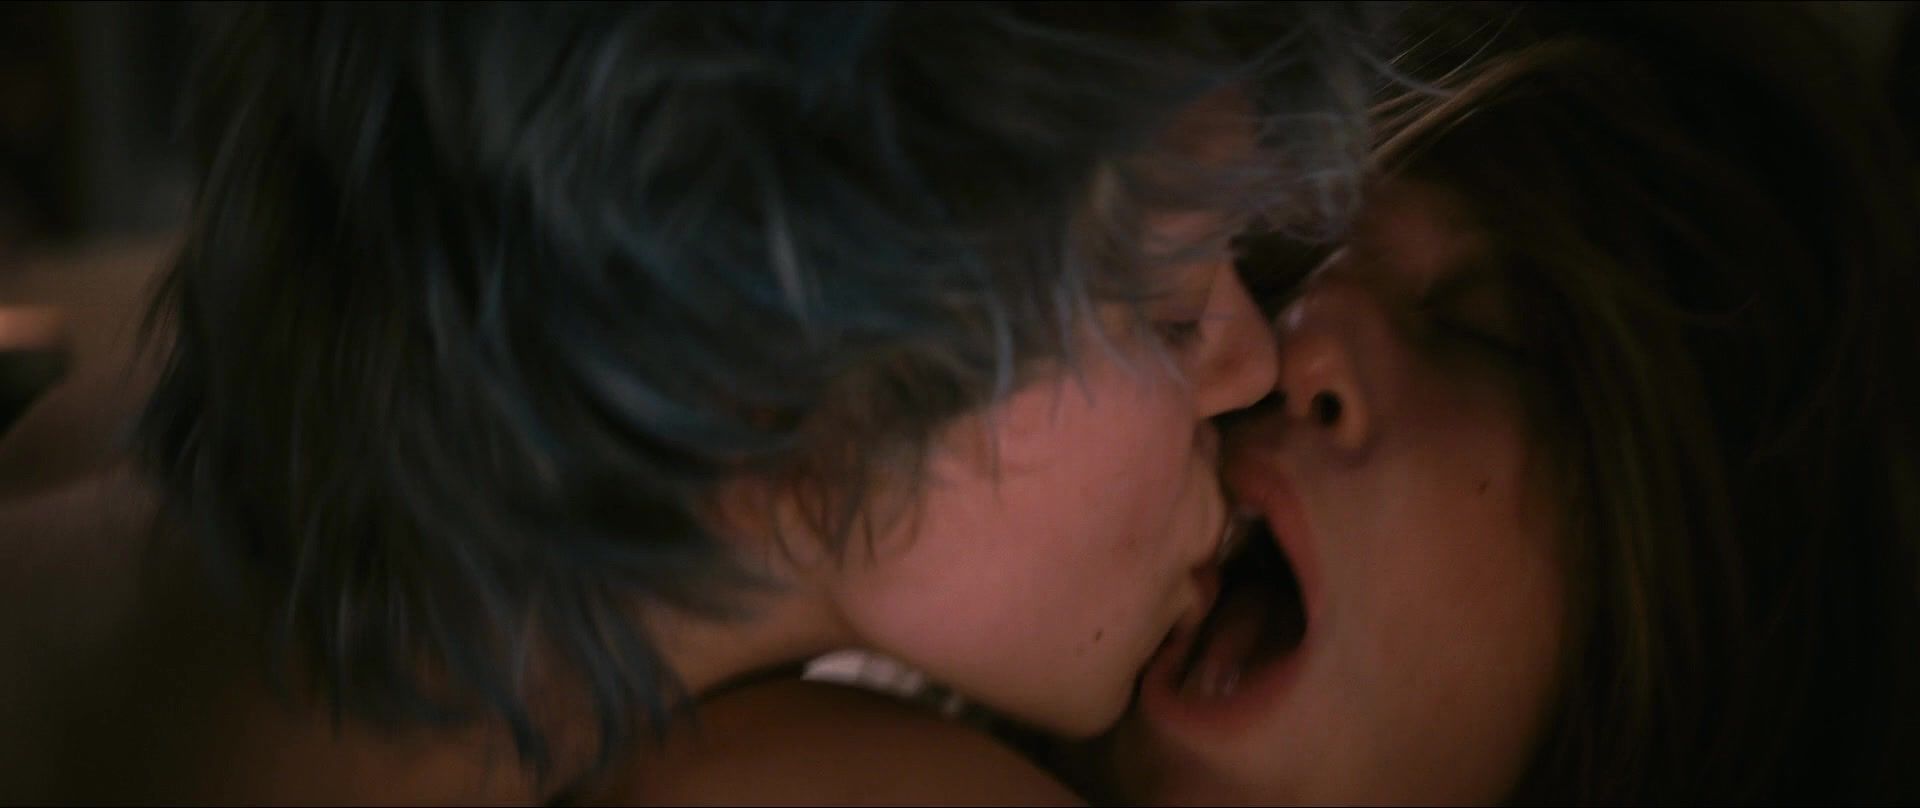 FullRips Best lesbian scene in movies | Adele Exarchopoulos nude & Léa Seydoux naked | The film "Blue Is The Warmest Color" (2013) Big Black Dick - 1